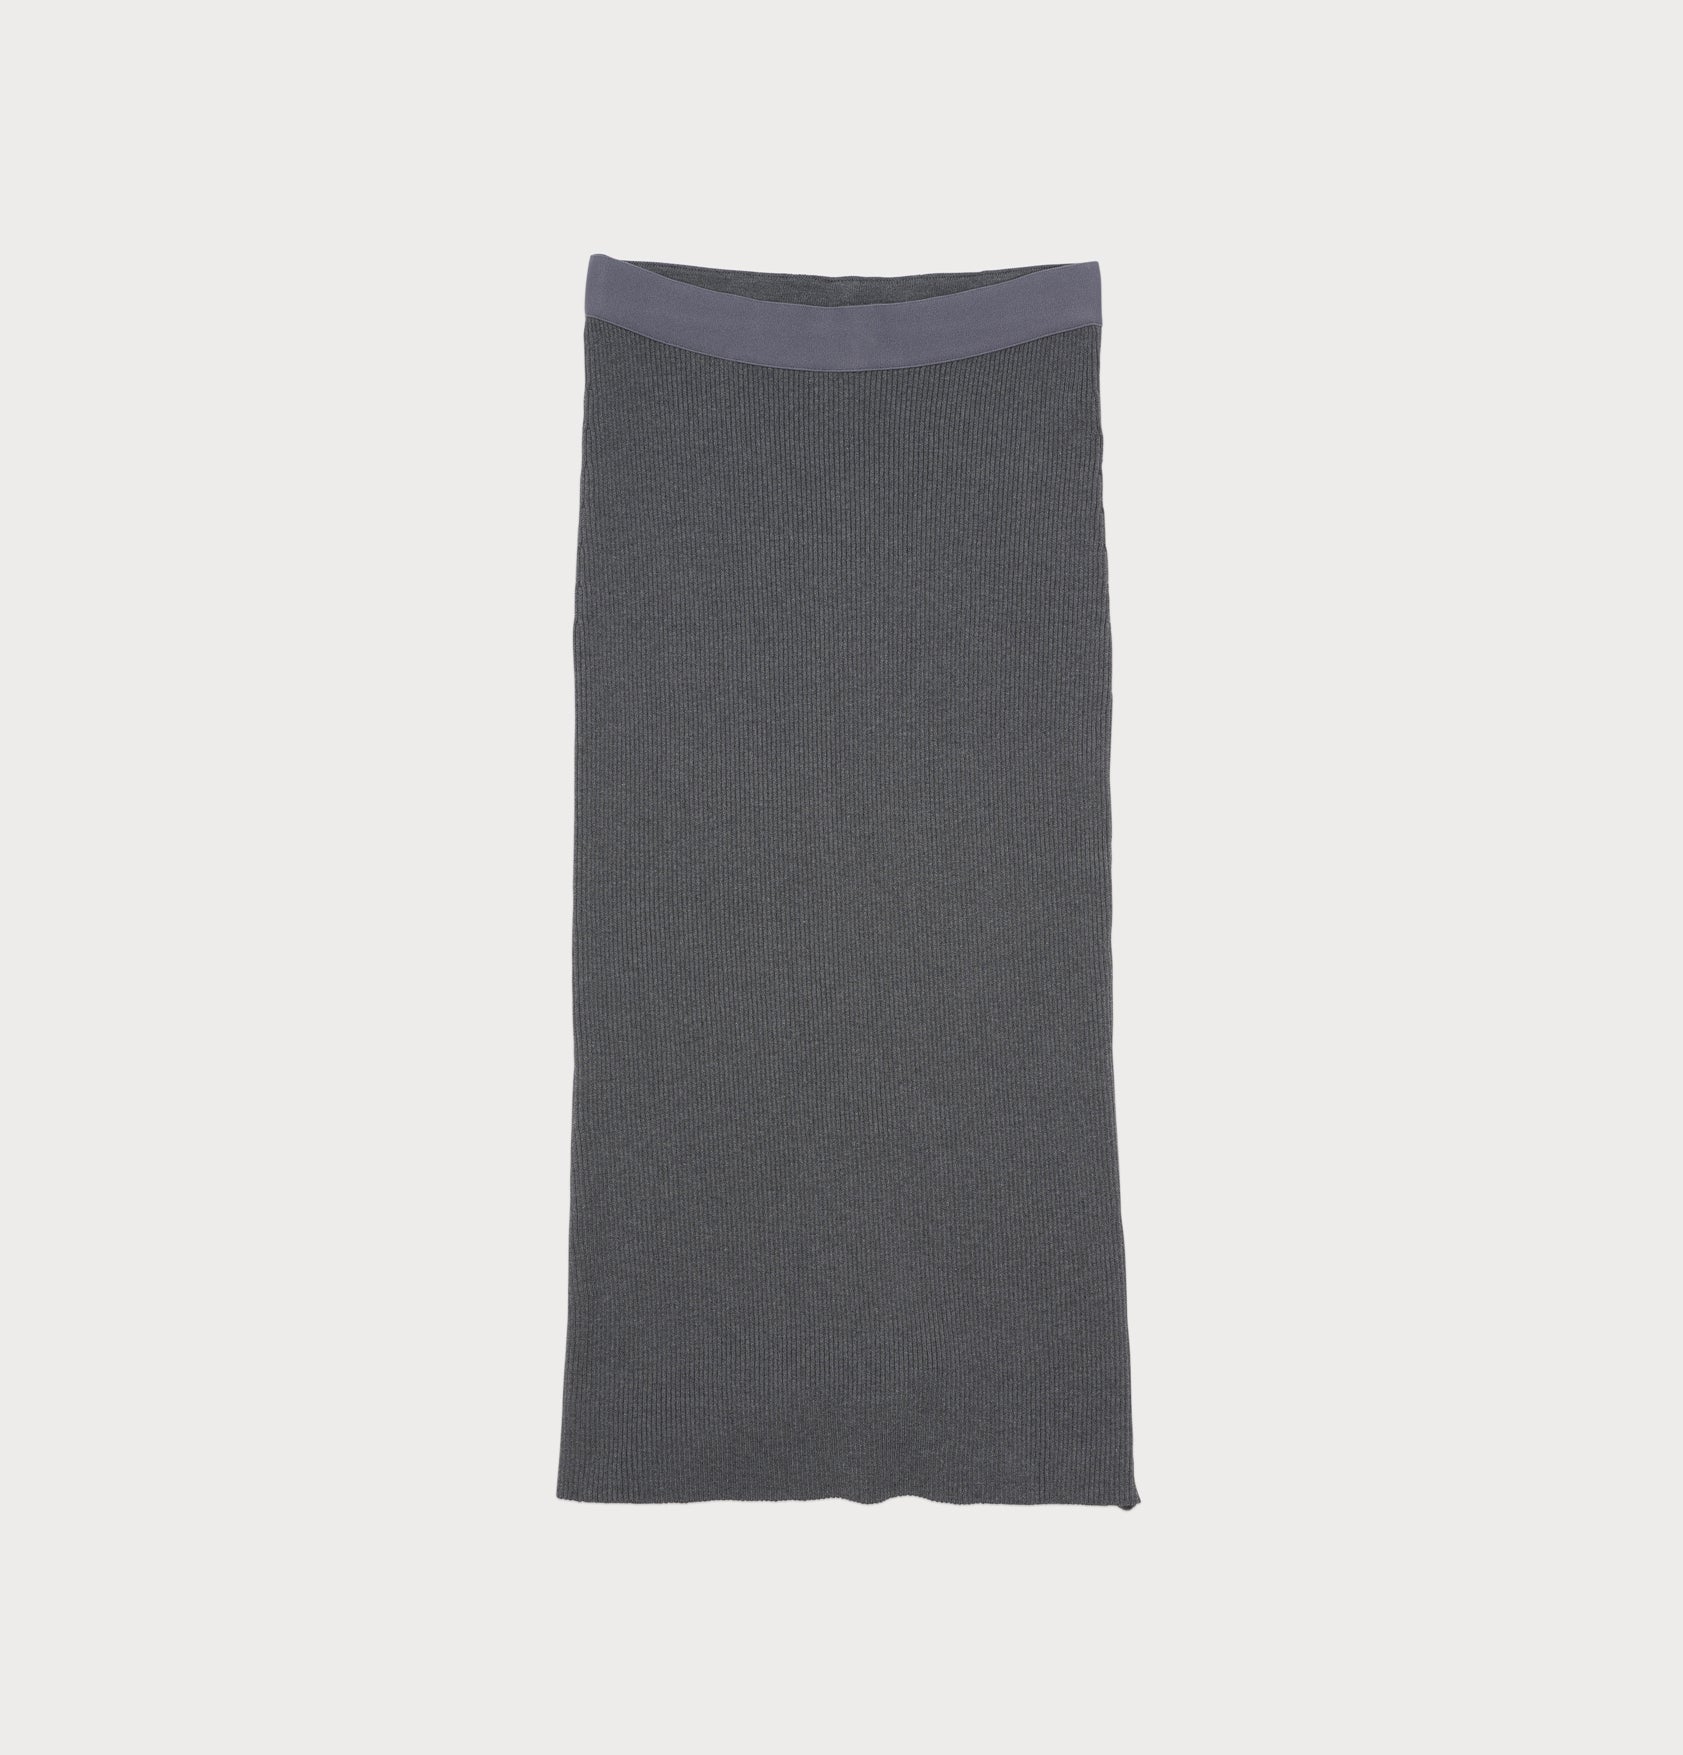 ribbed knit skirt in grey made from sustainable materials